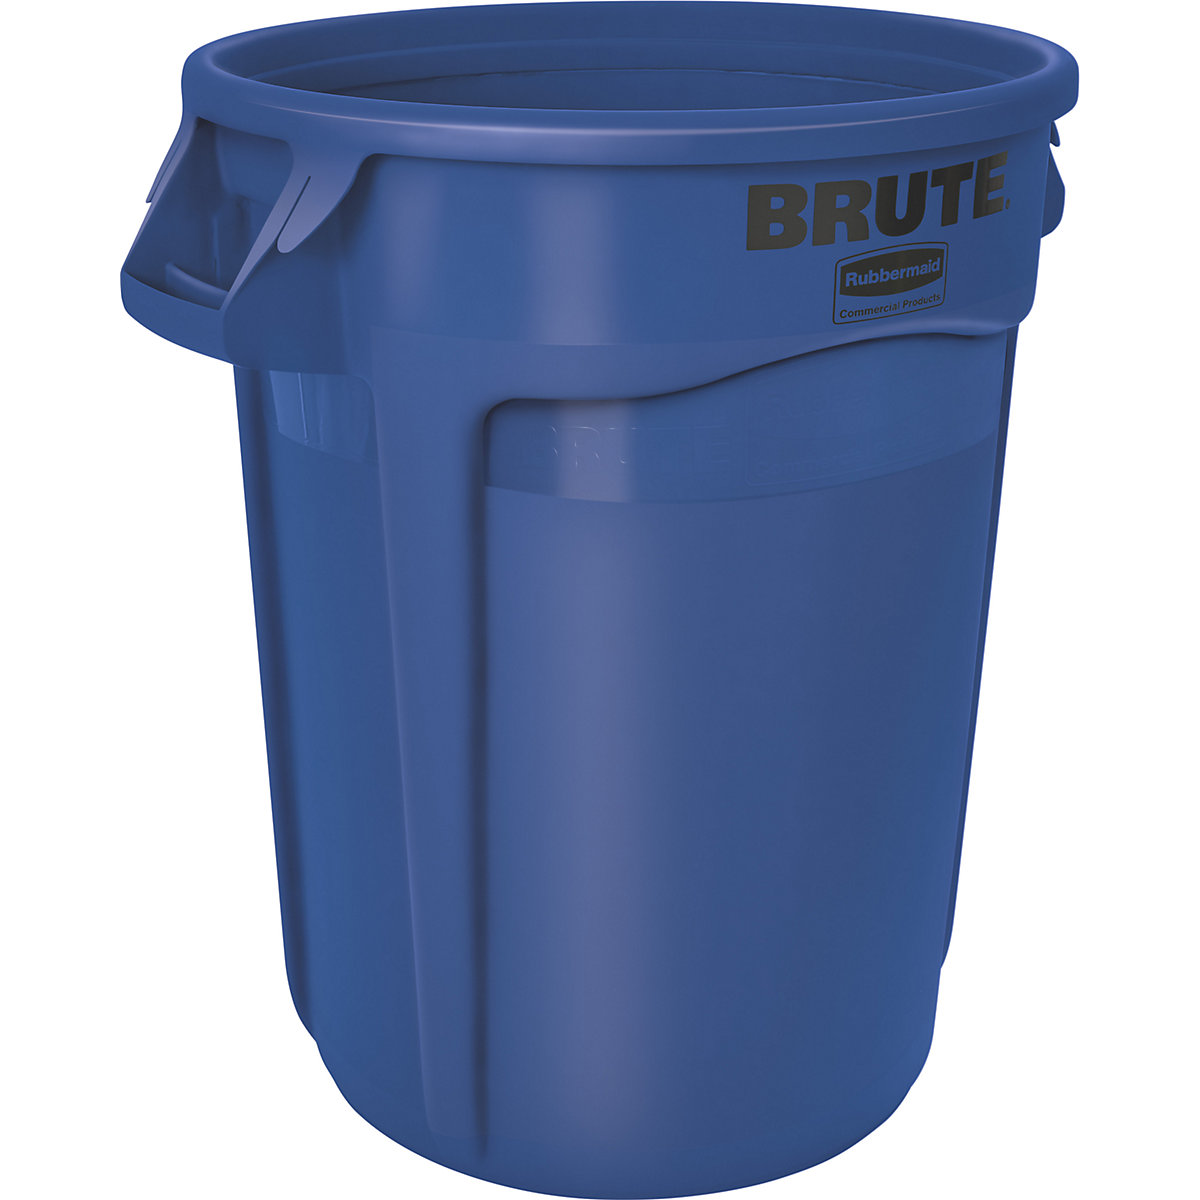 BRUTE® universal container, round – Rubbermaid, capacity 121 l, blue-10